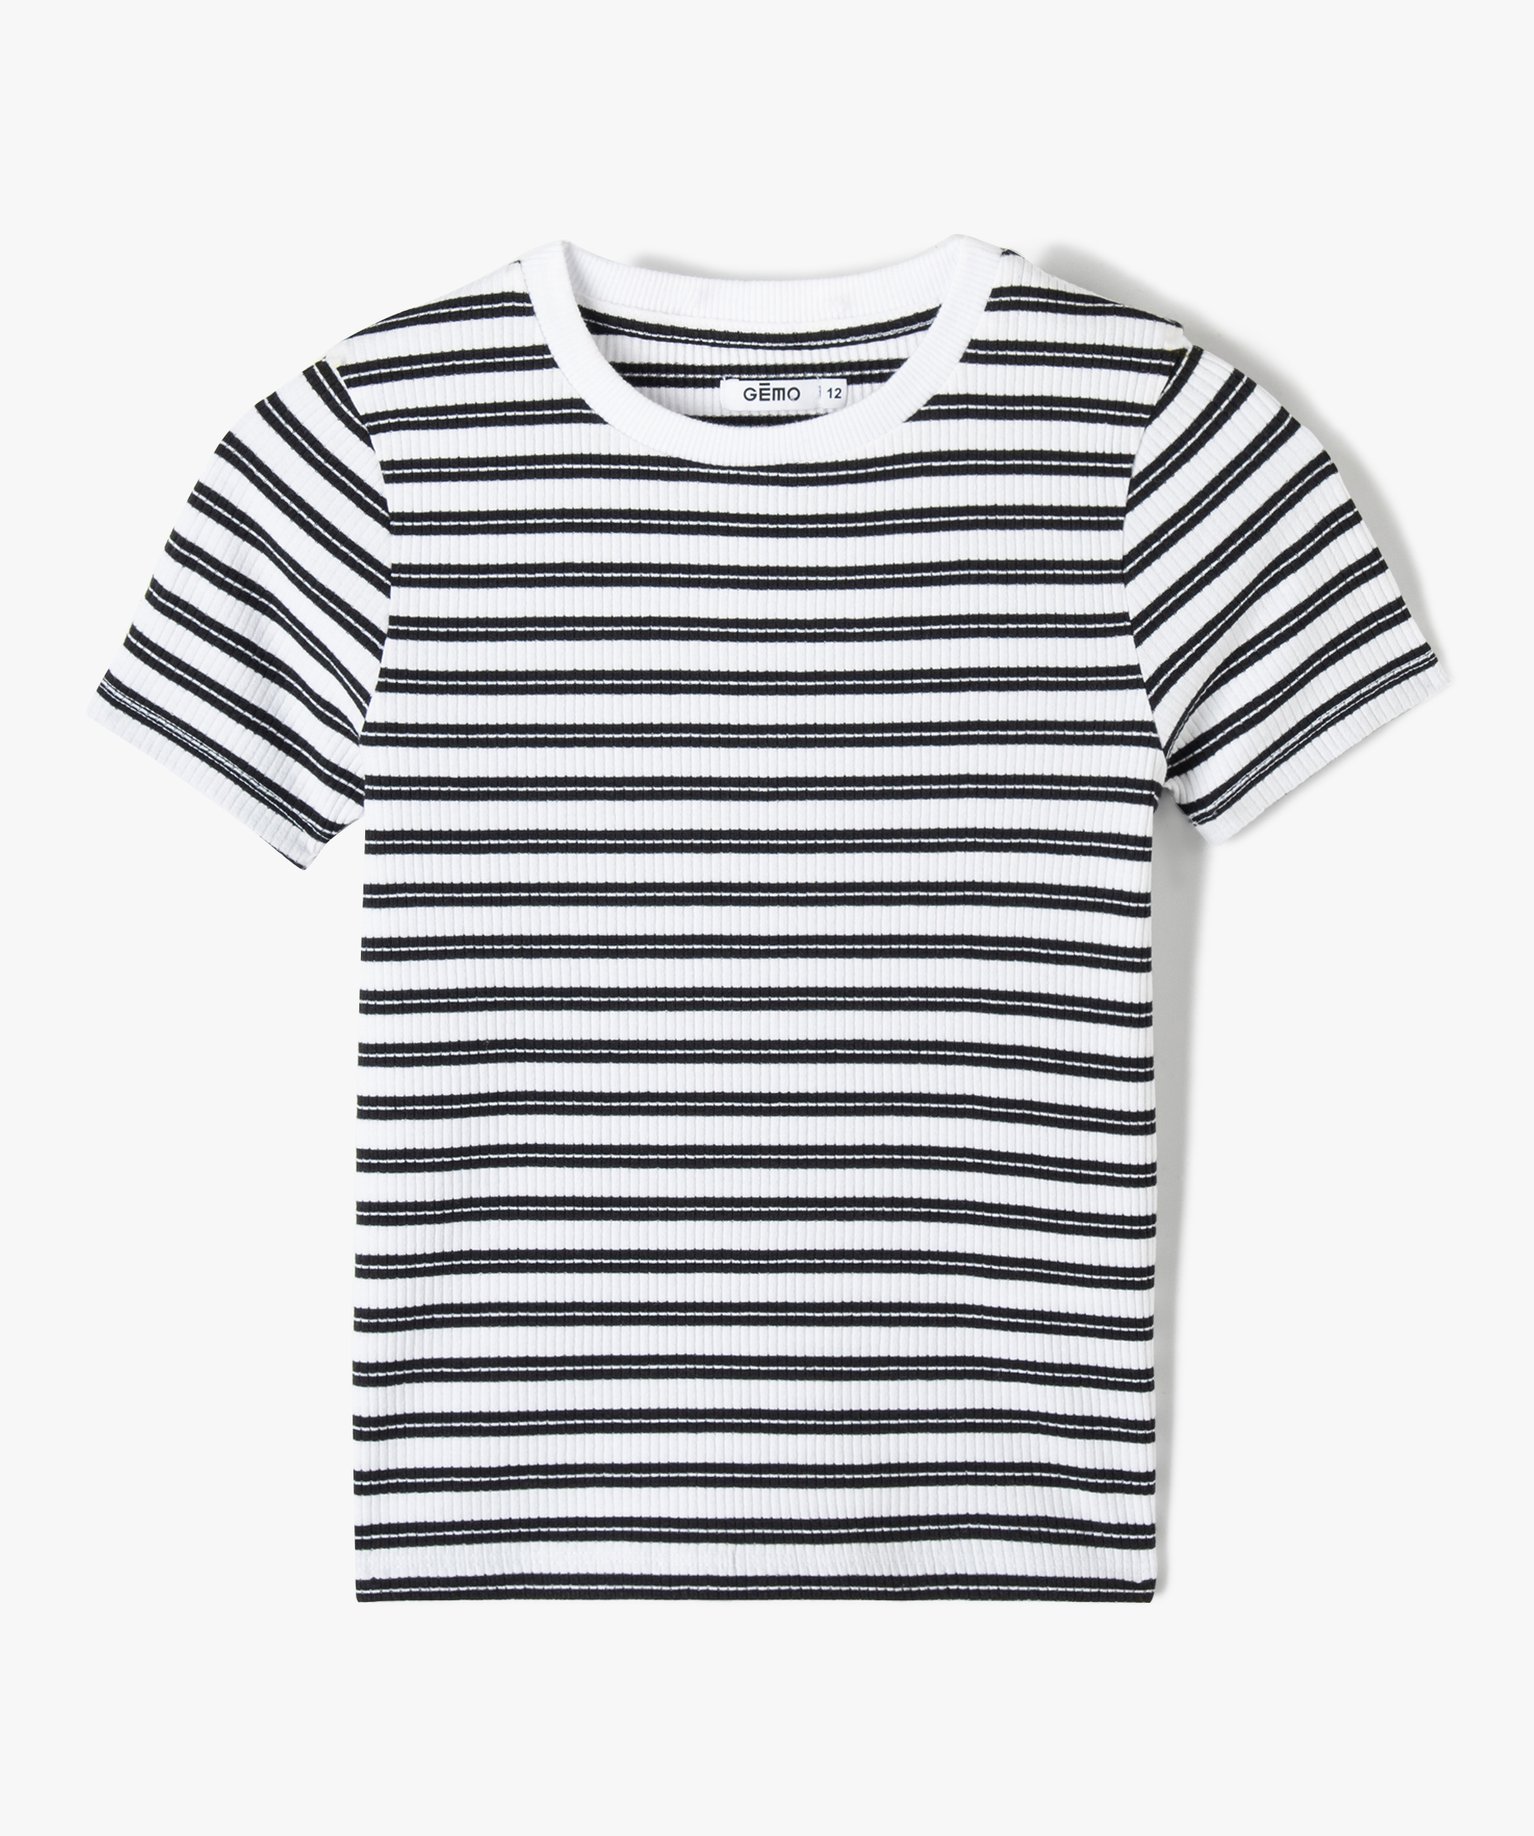 tee-shirt fille en maille cotelee a rayures imprime tee-shirts